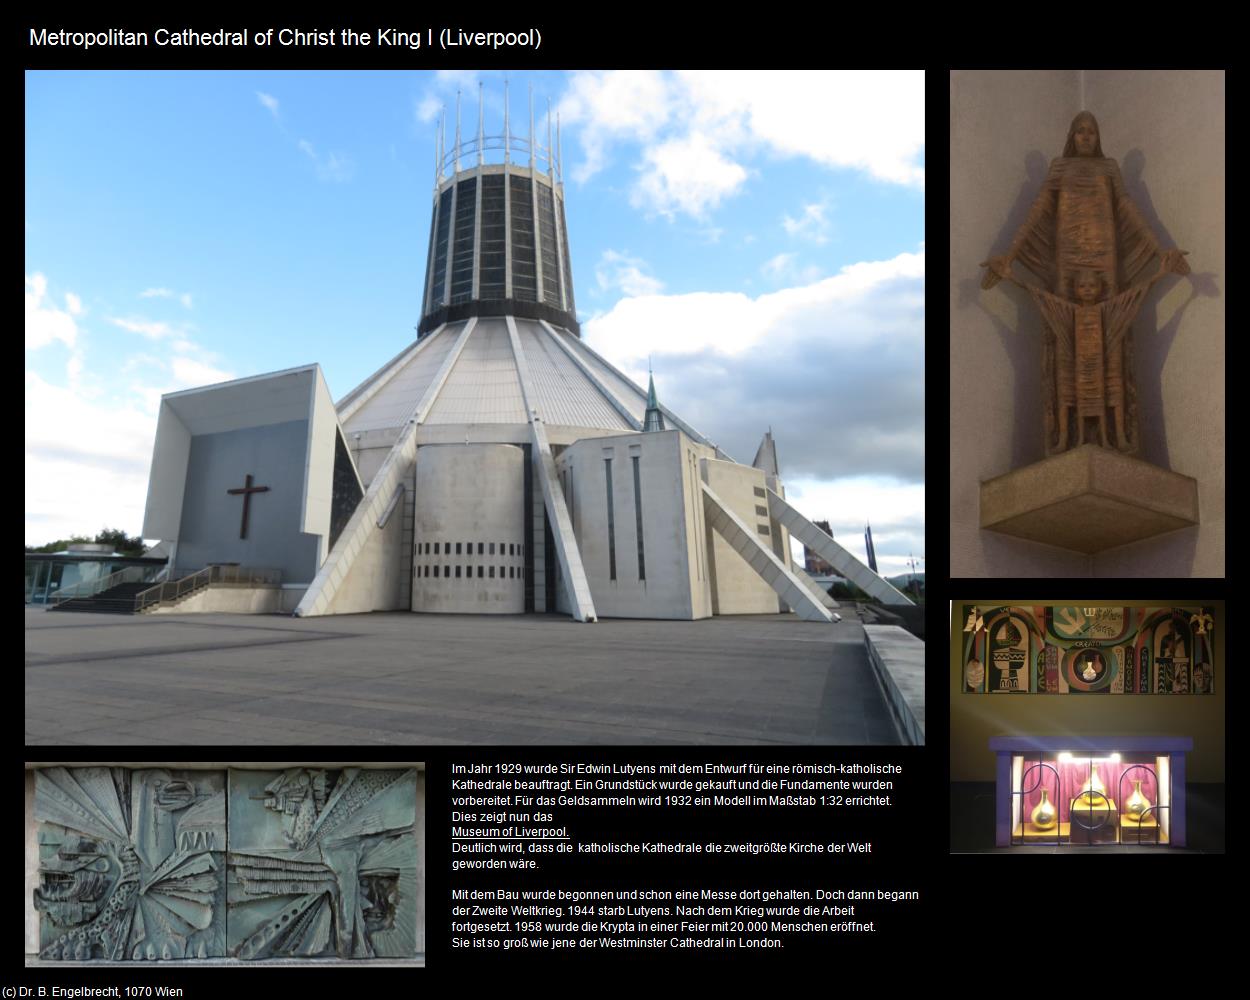 Metropolitan Cathedral of Christ the King I   (Liverpool, England) in Kulturatlas-ENGLAND und WALES(c)B.Engelbrecht